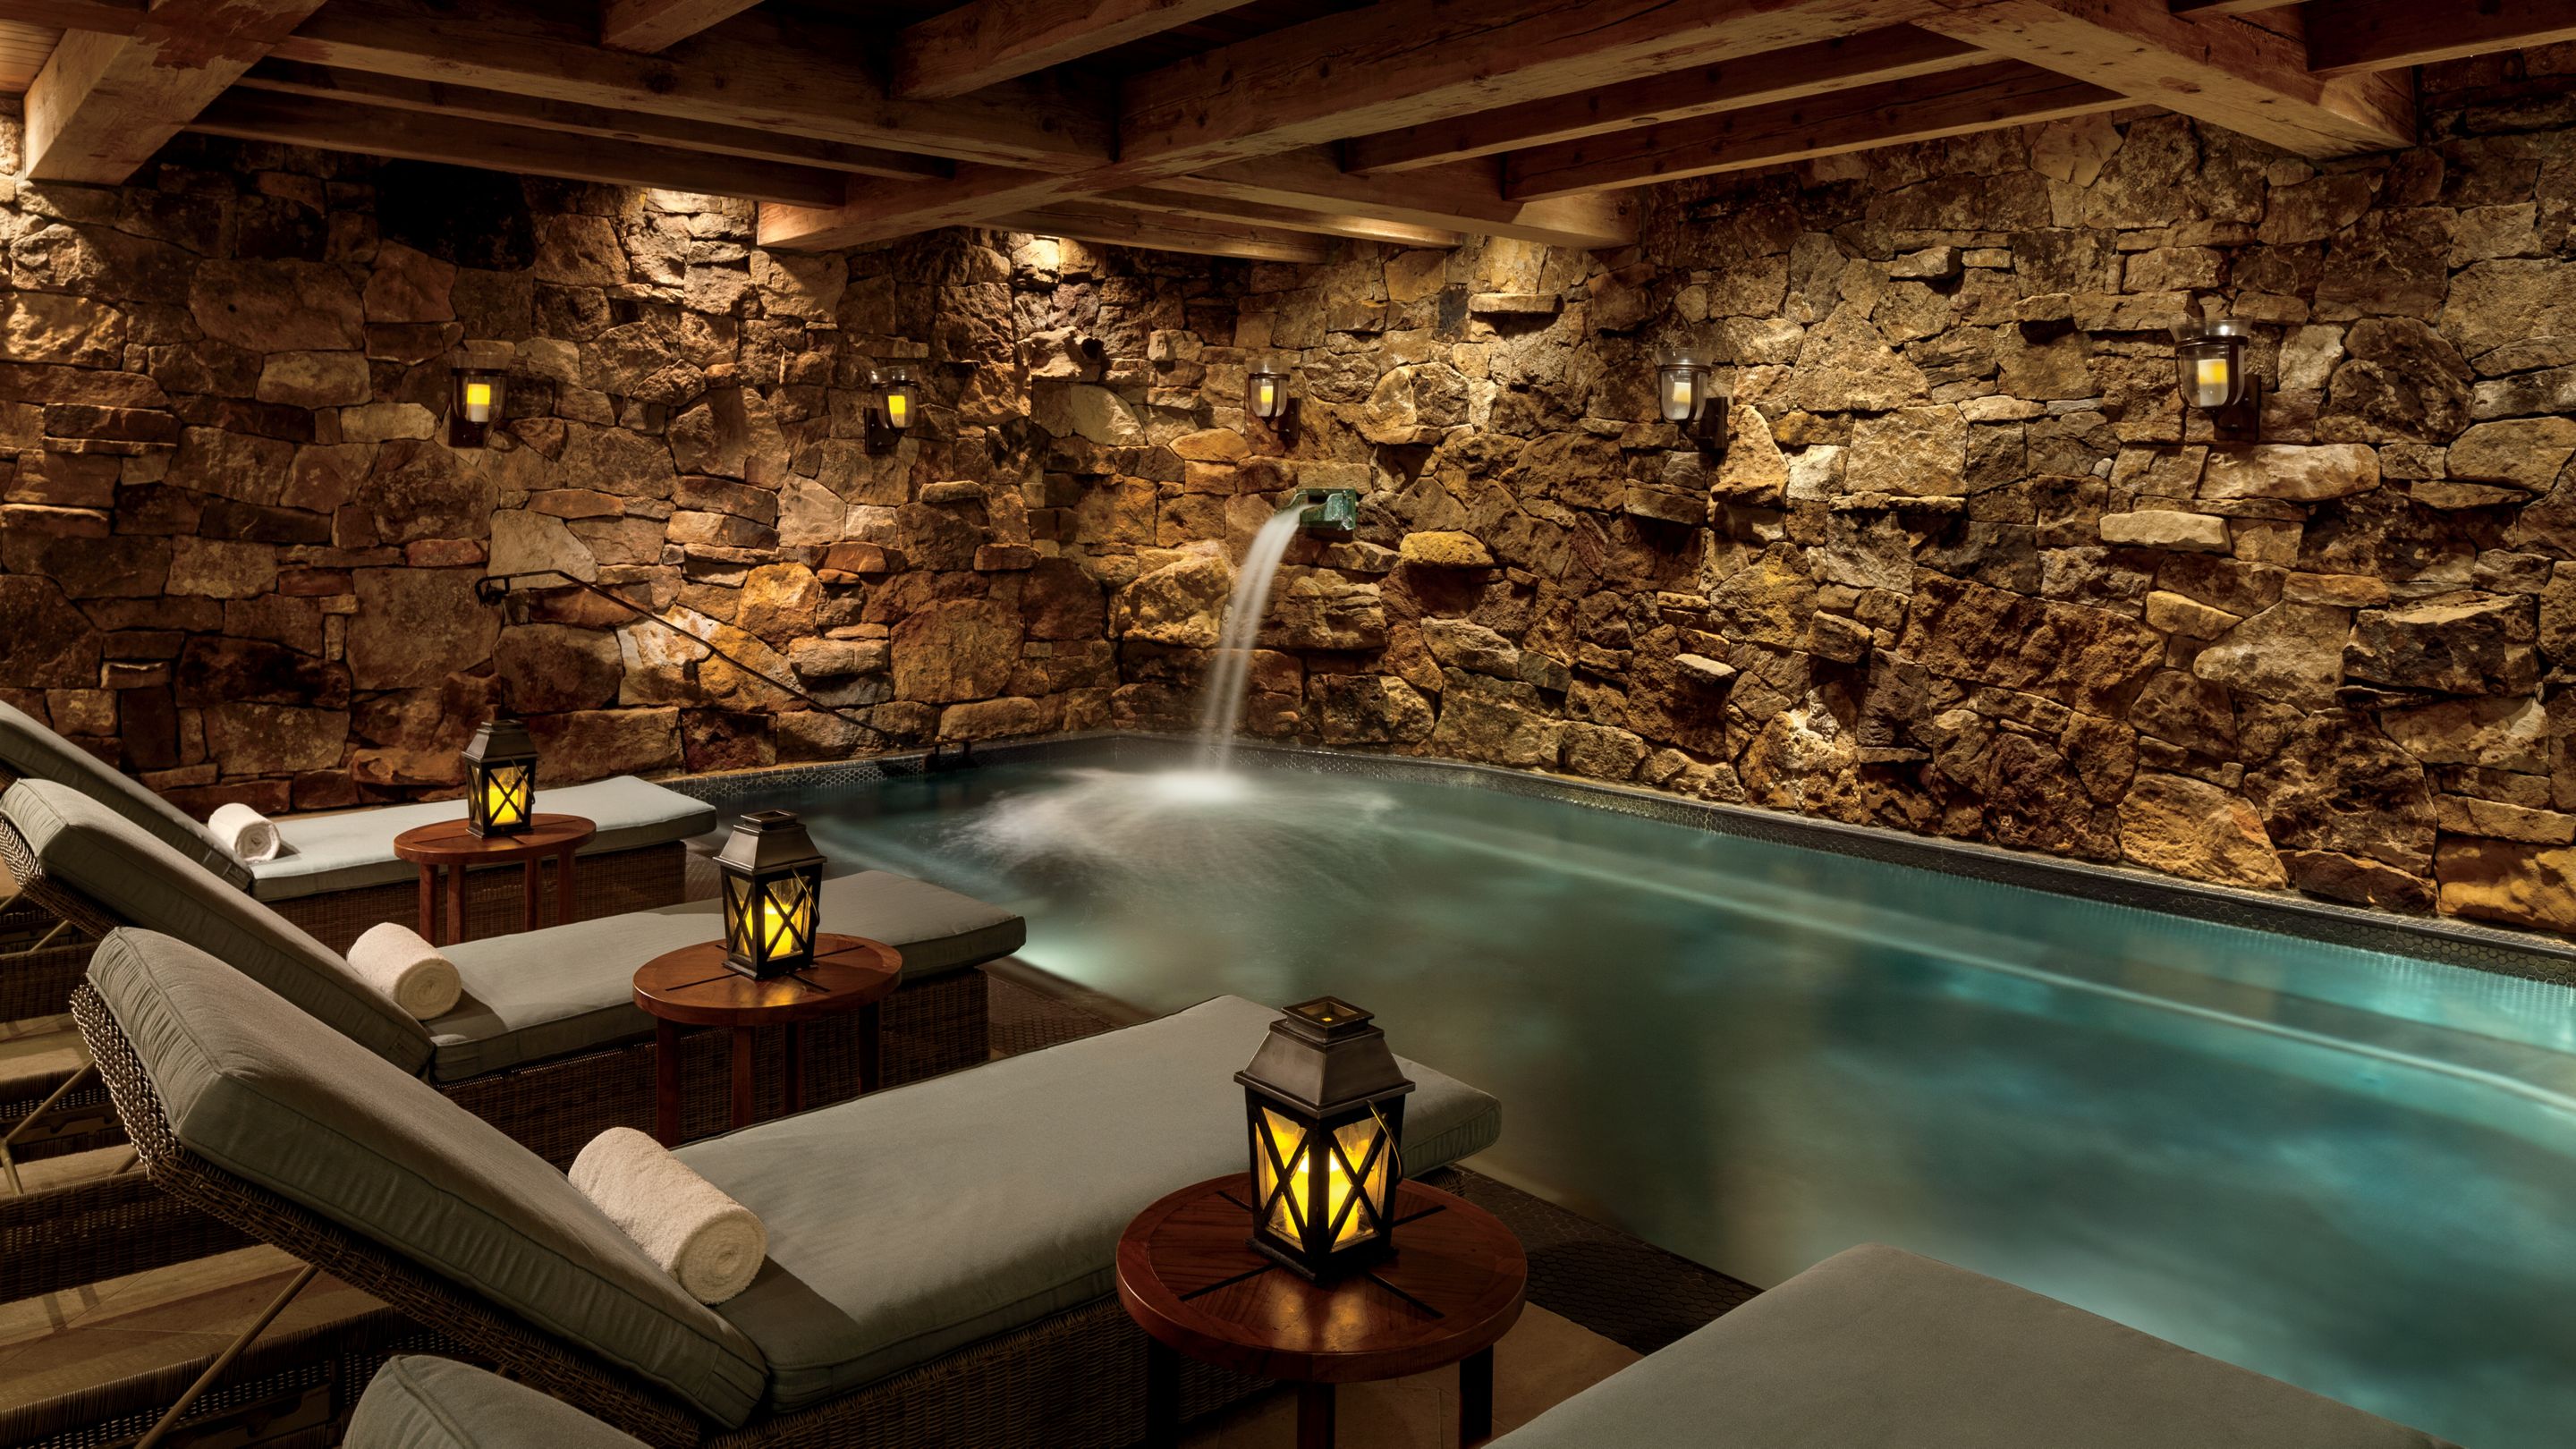 Indoor pool with stone walls and lounge chairs